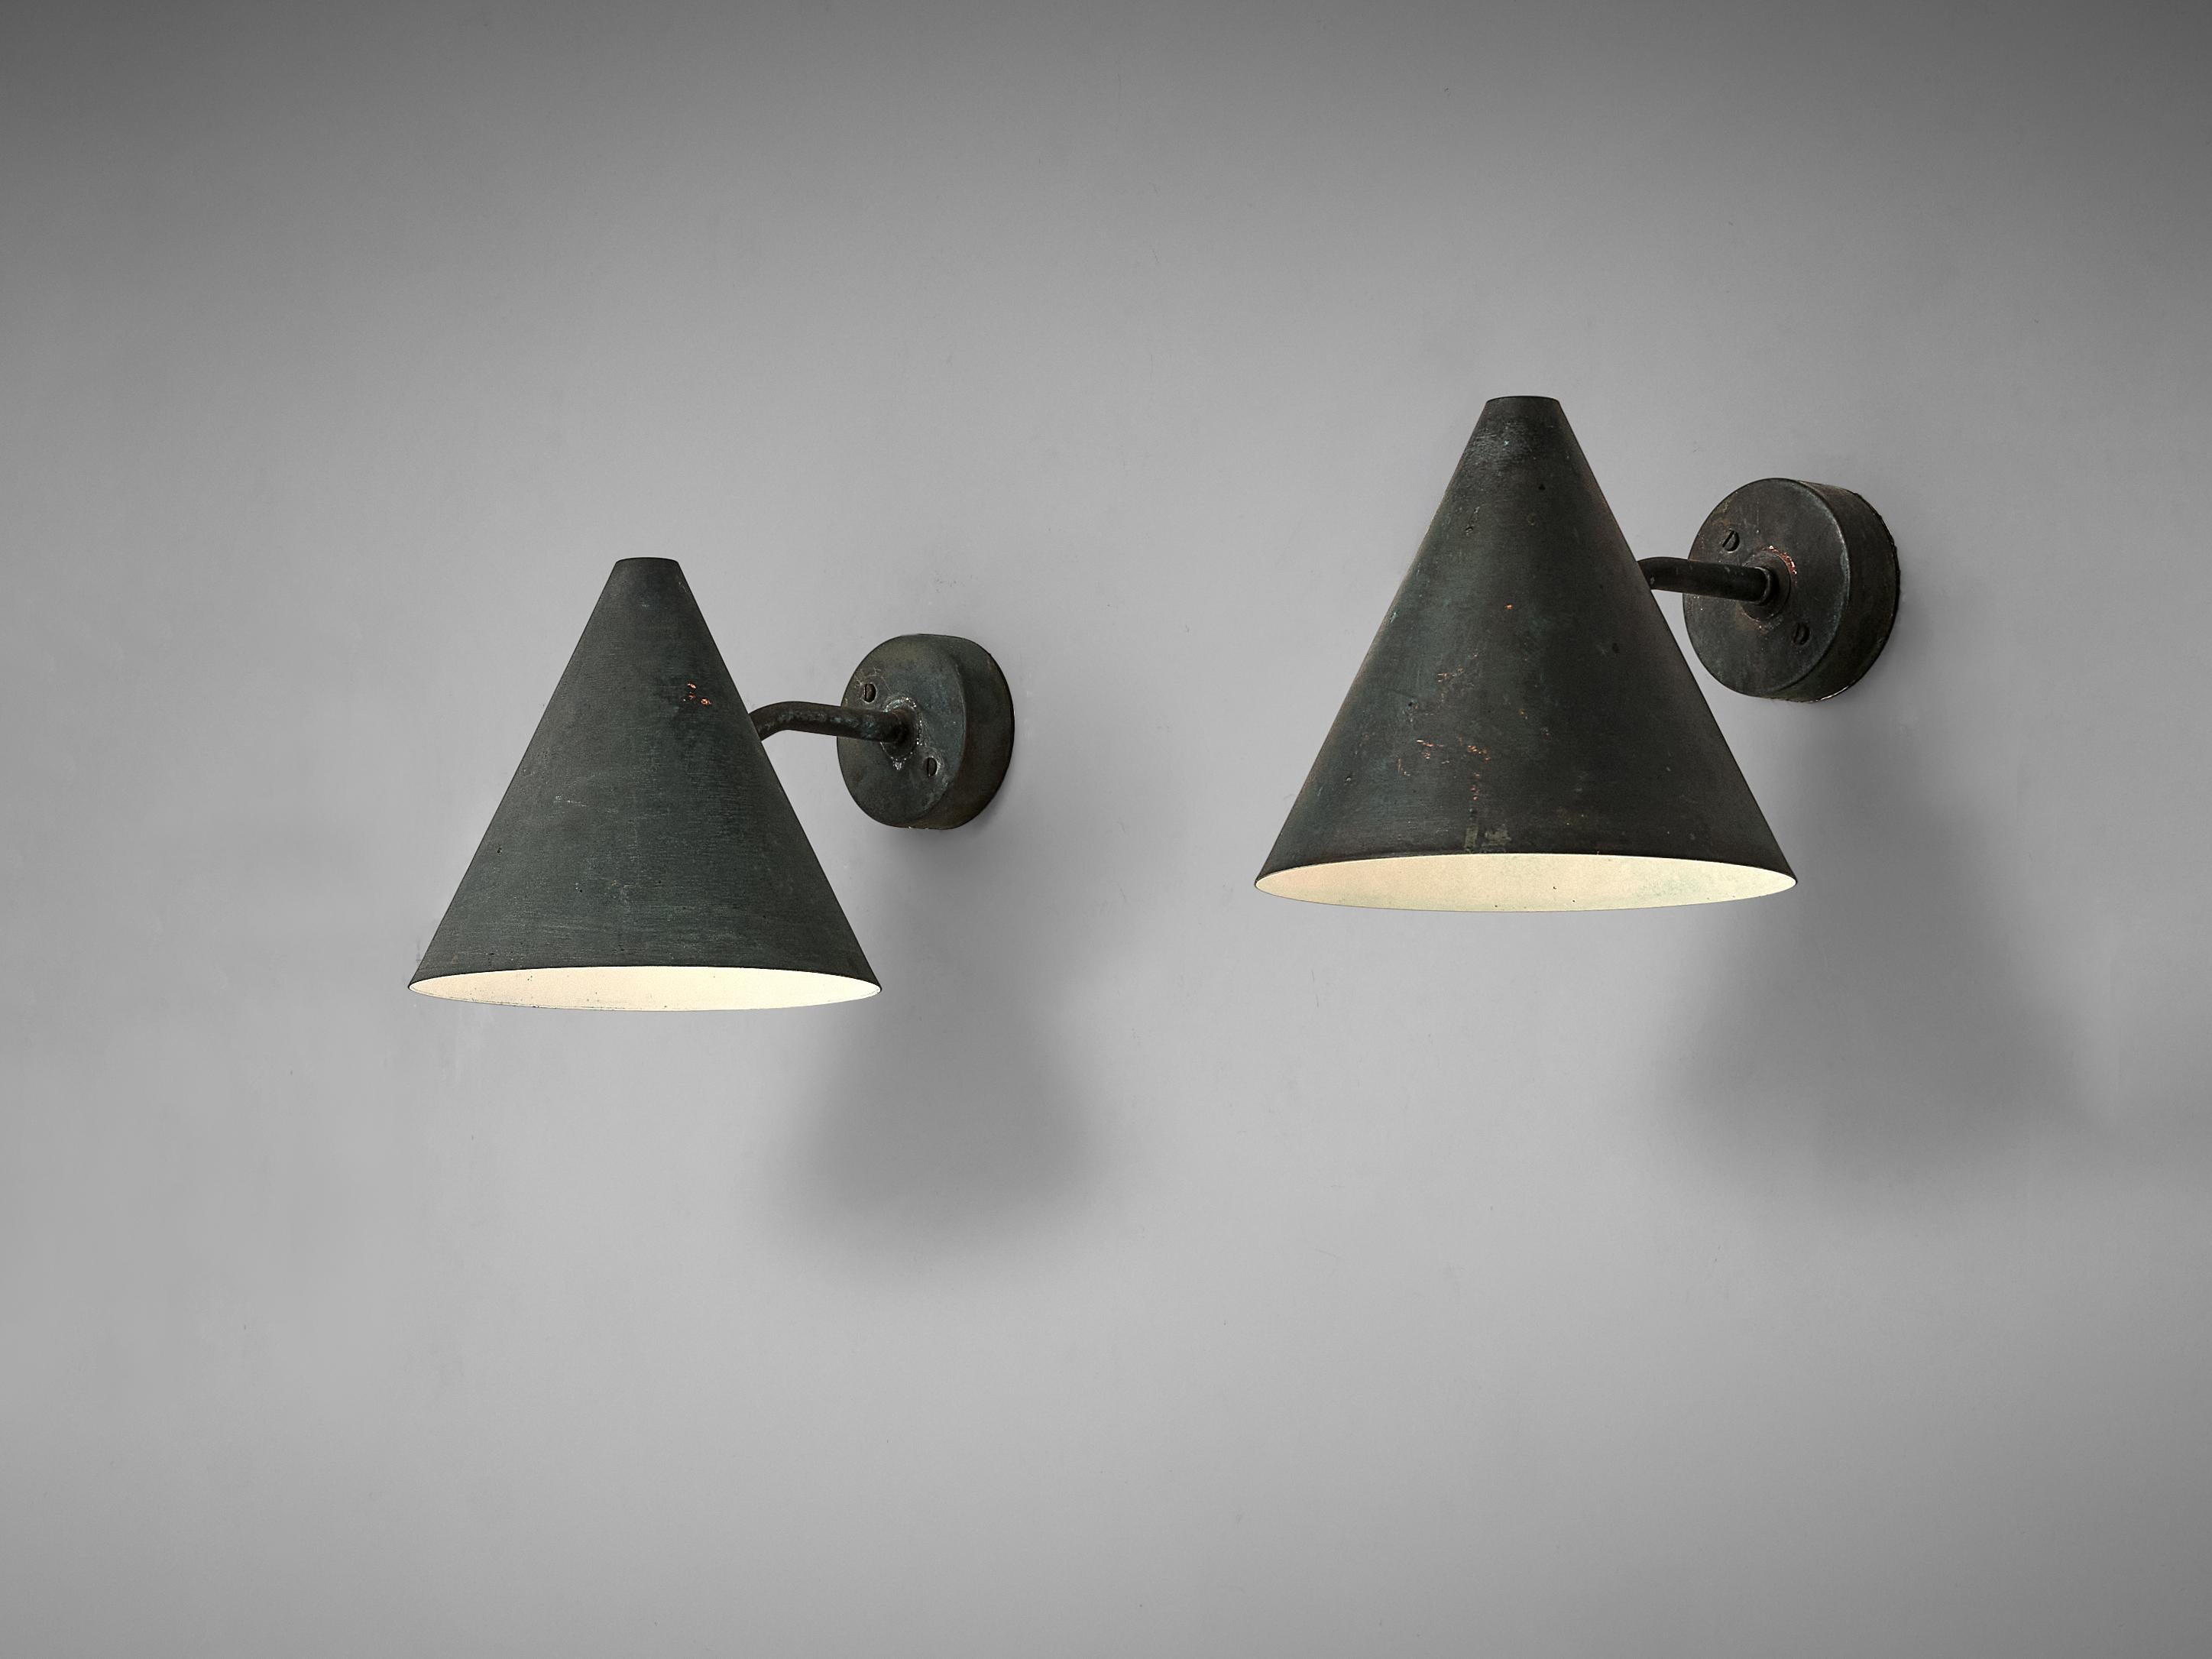 Hans-Agne Jakobsson 'Tratten' Wall Lights in Patinated Copper  1